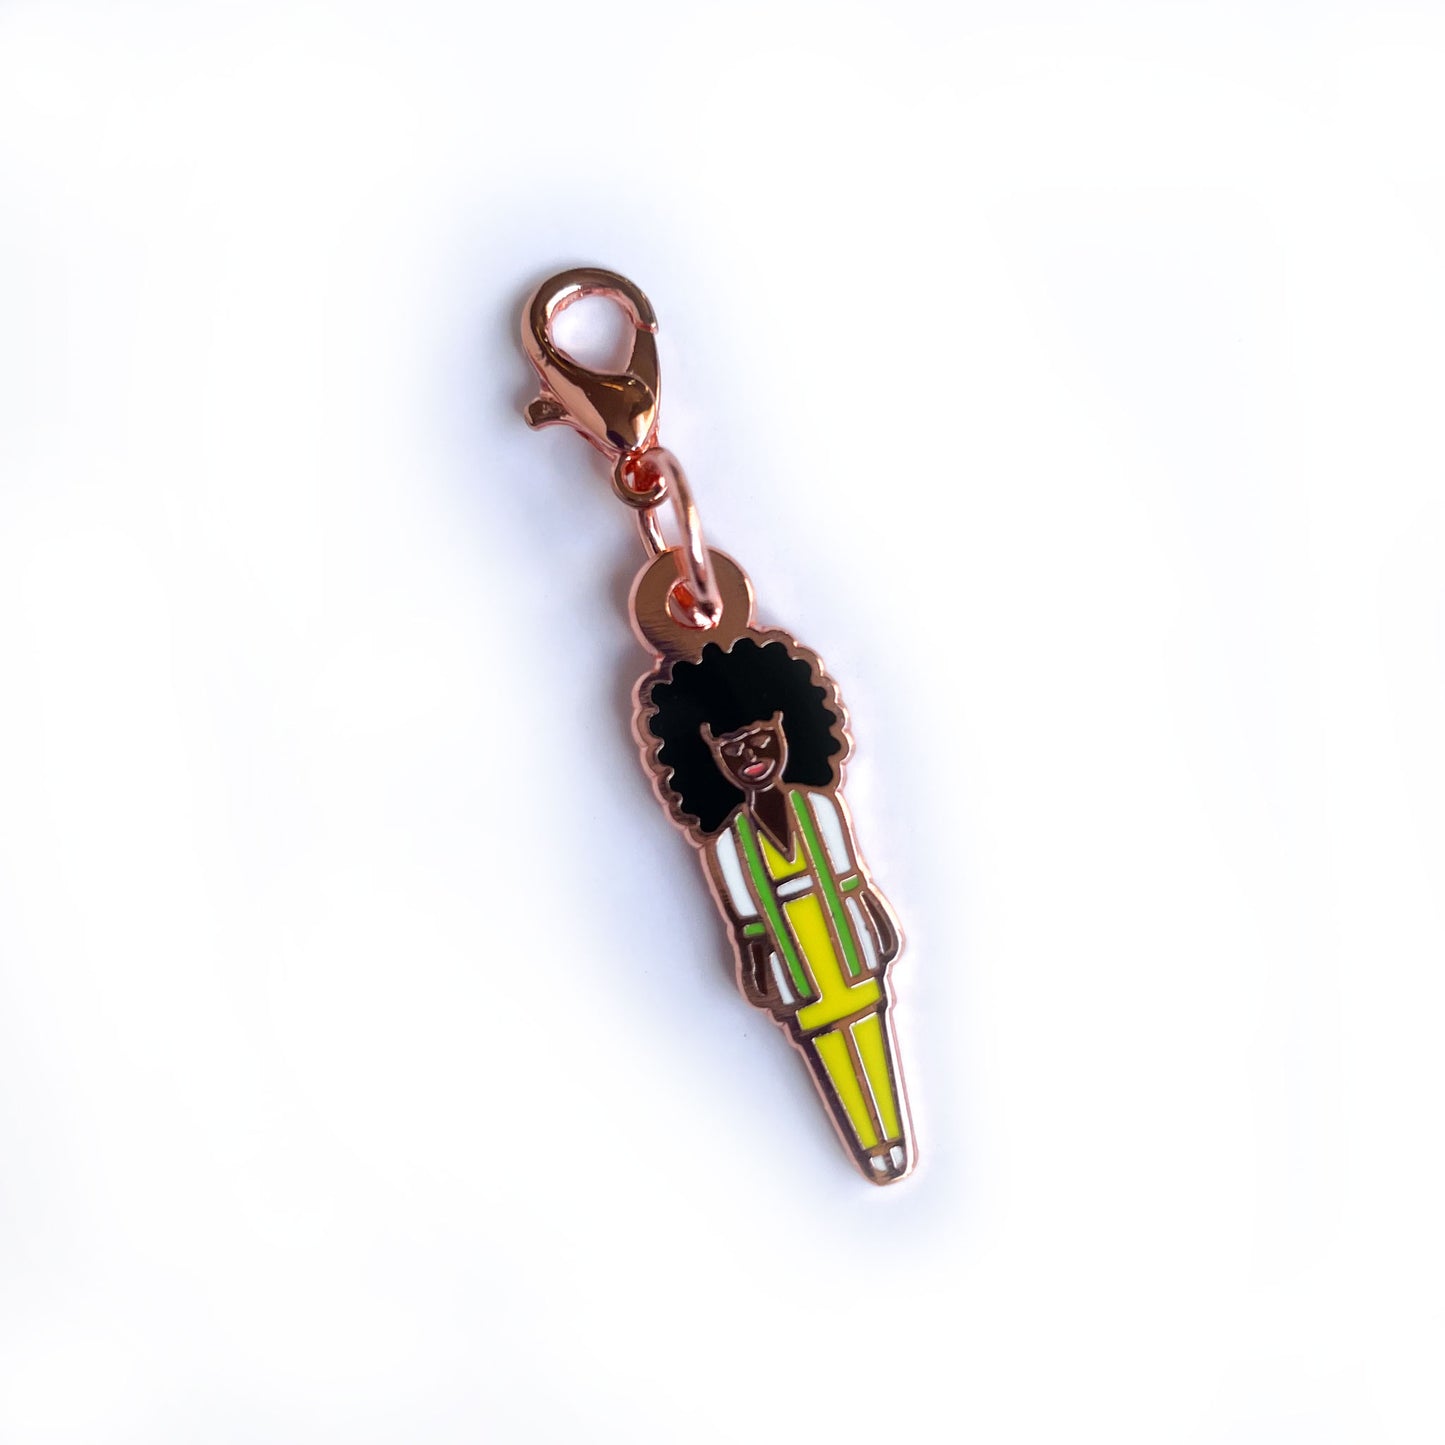 An enamel charm shaped like a barbie doll with dark brown skin and an afro in a yellow suit. 